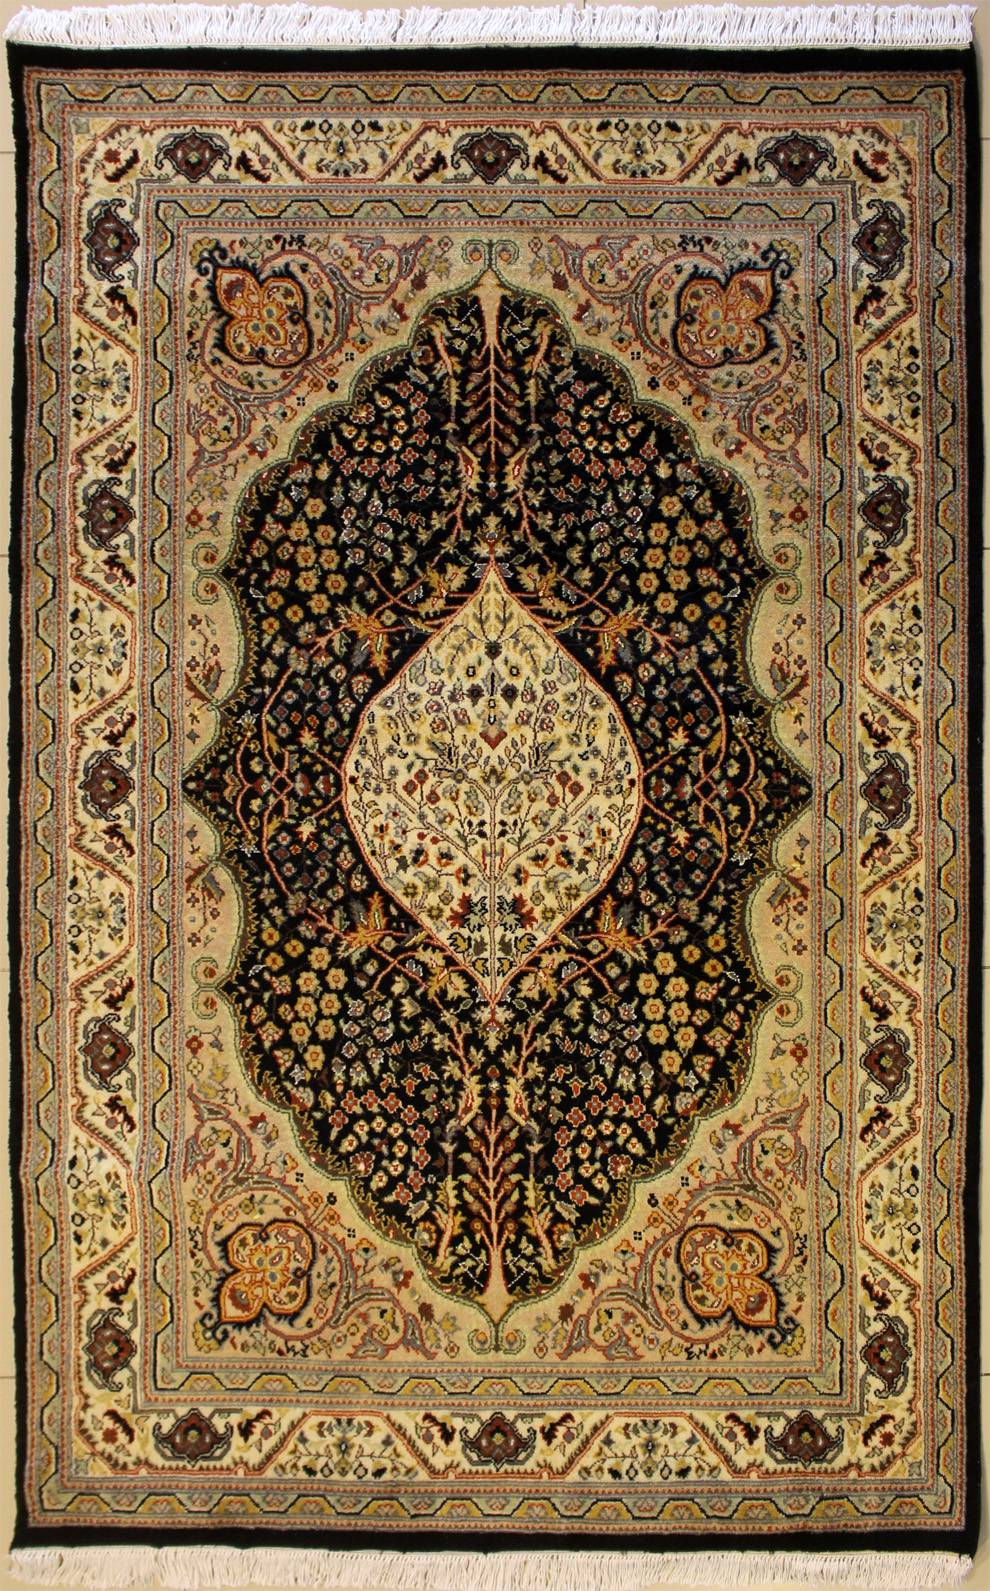 a 4x6 Rectangular Double Knot Rug RugsTC 4'1 x 6'2 Pak Persian Area Rug with Wool Pile Floral Design 100% Original Hand-Knotted in Blue,Reddish Brown,Beige Colors